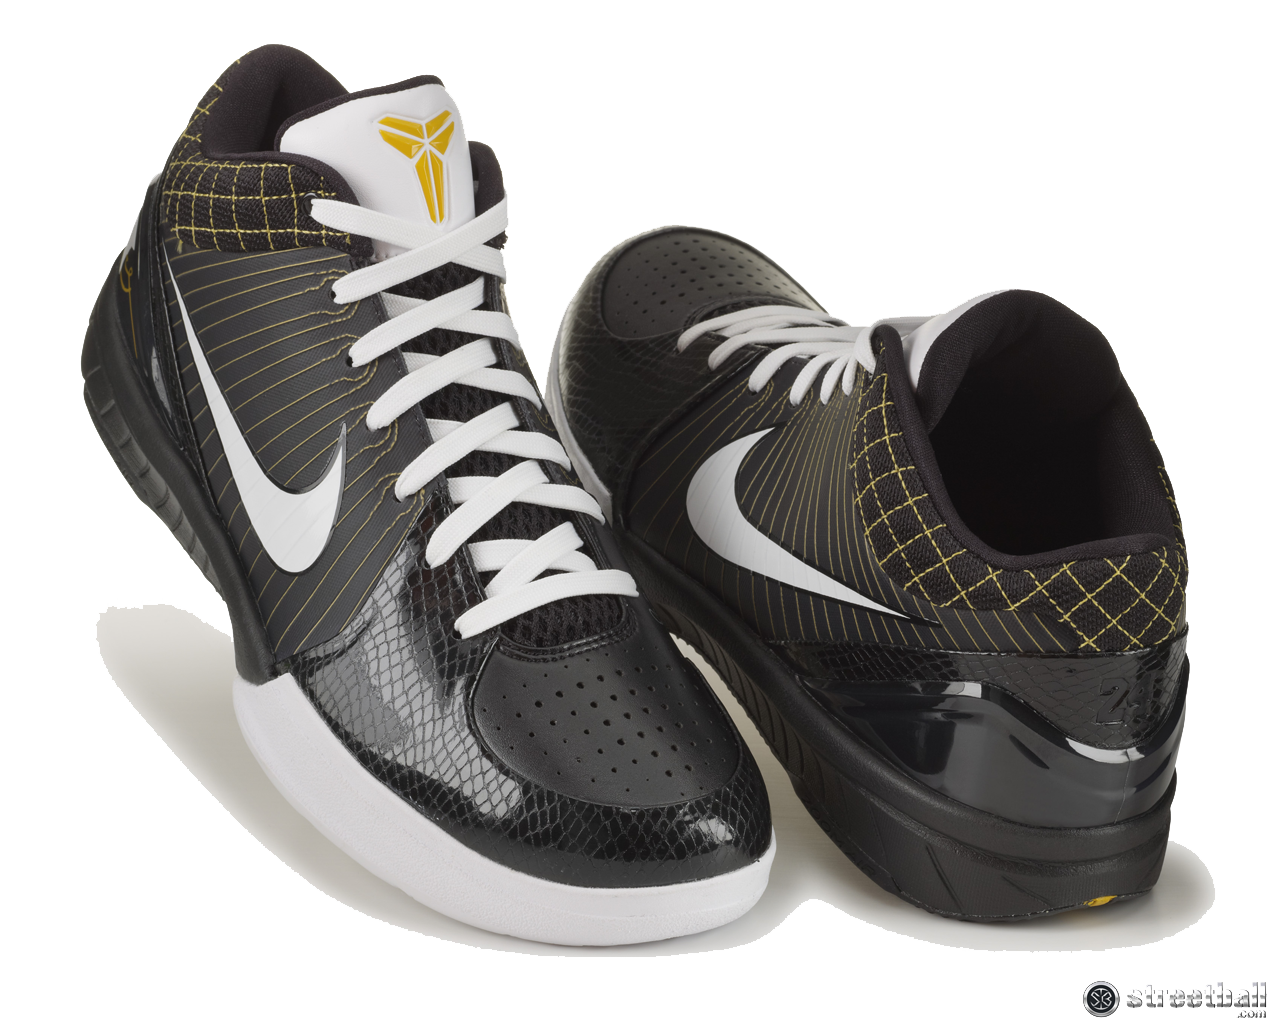 Nike Shoe Png - Nike Shoes Png Image, Transparent background PNG HD thumbnail